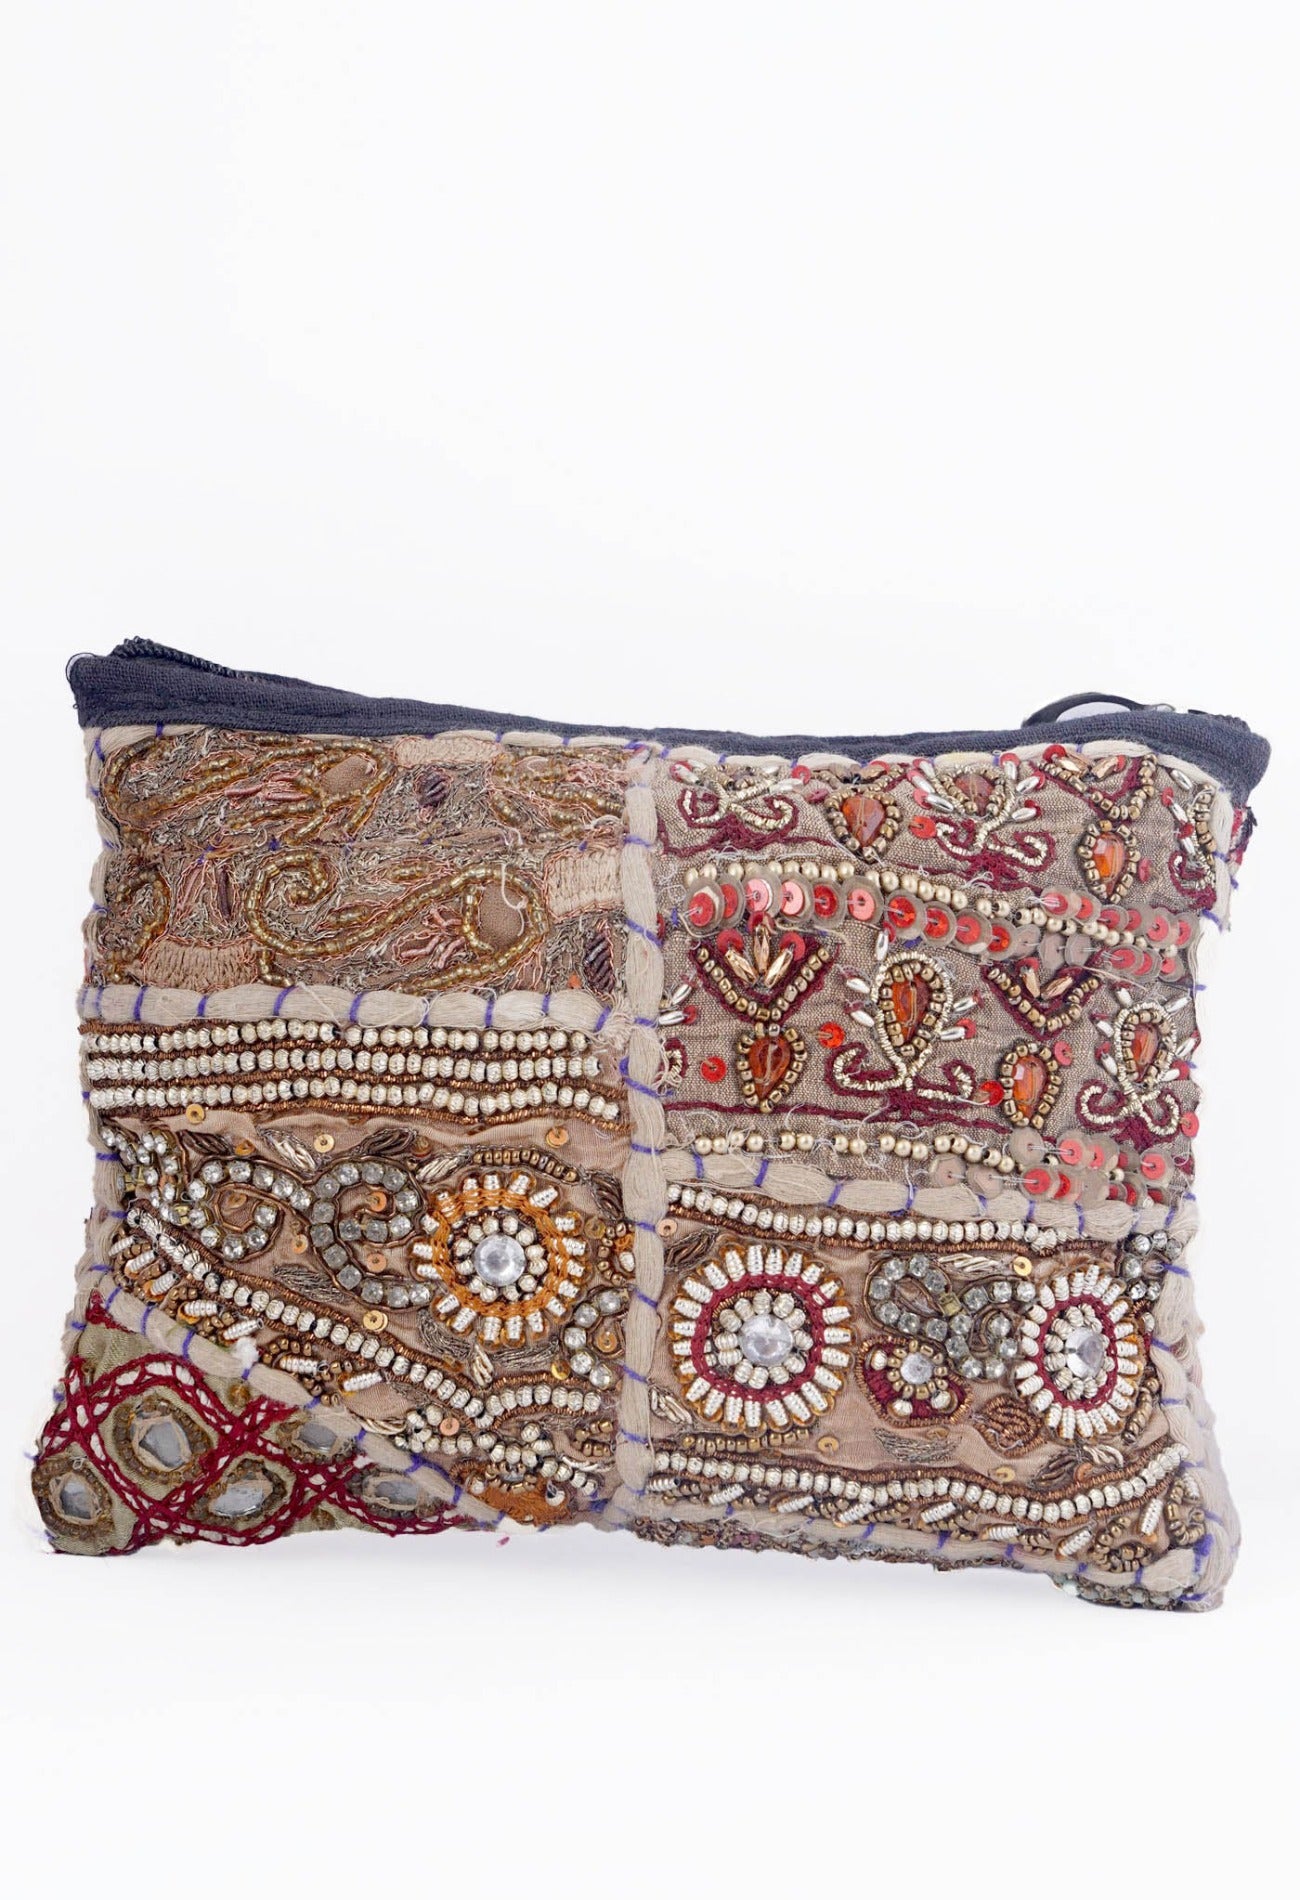 Online Shopping for Cream Indian Handicraft Embroidered Clutch Bag with Weaving from Rajasthan at Unnatisilks.com India_x000D_
